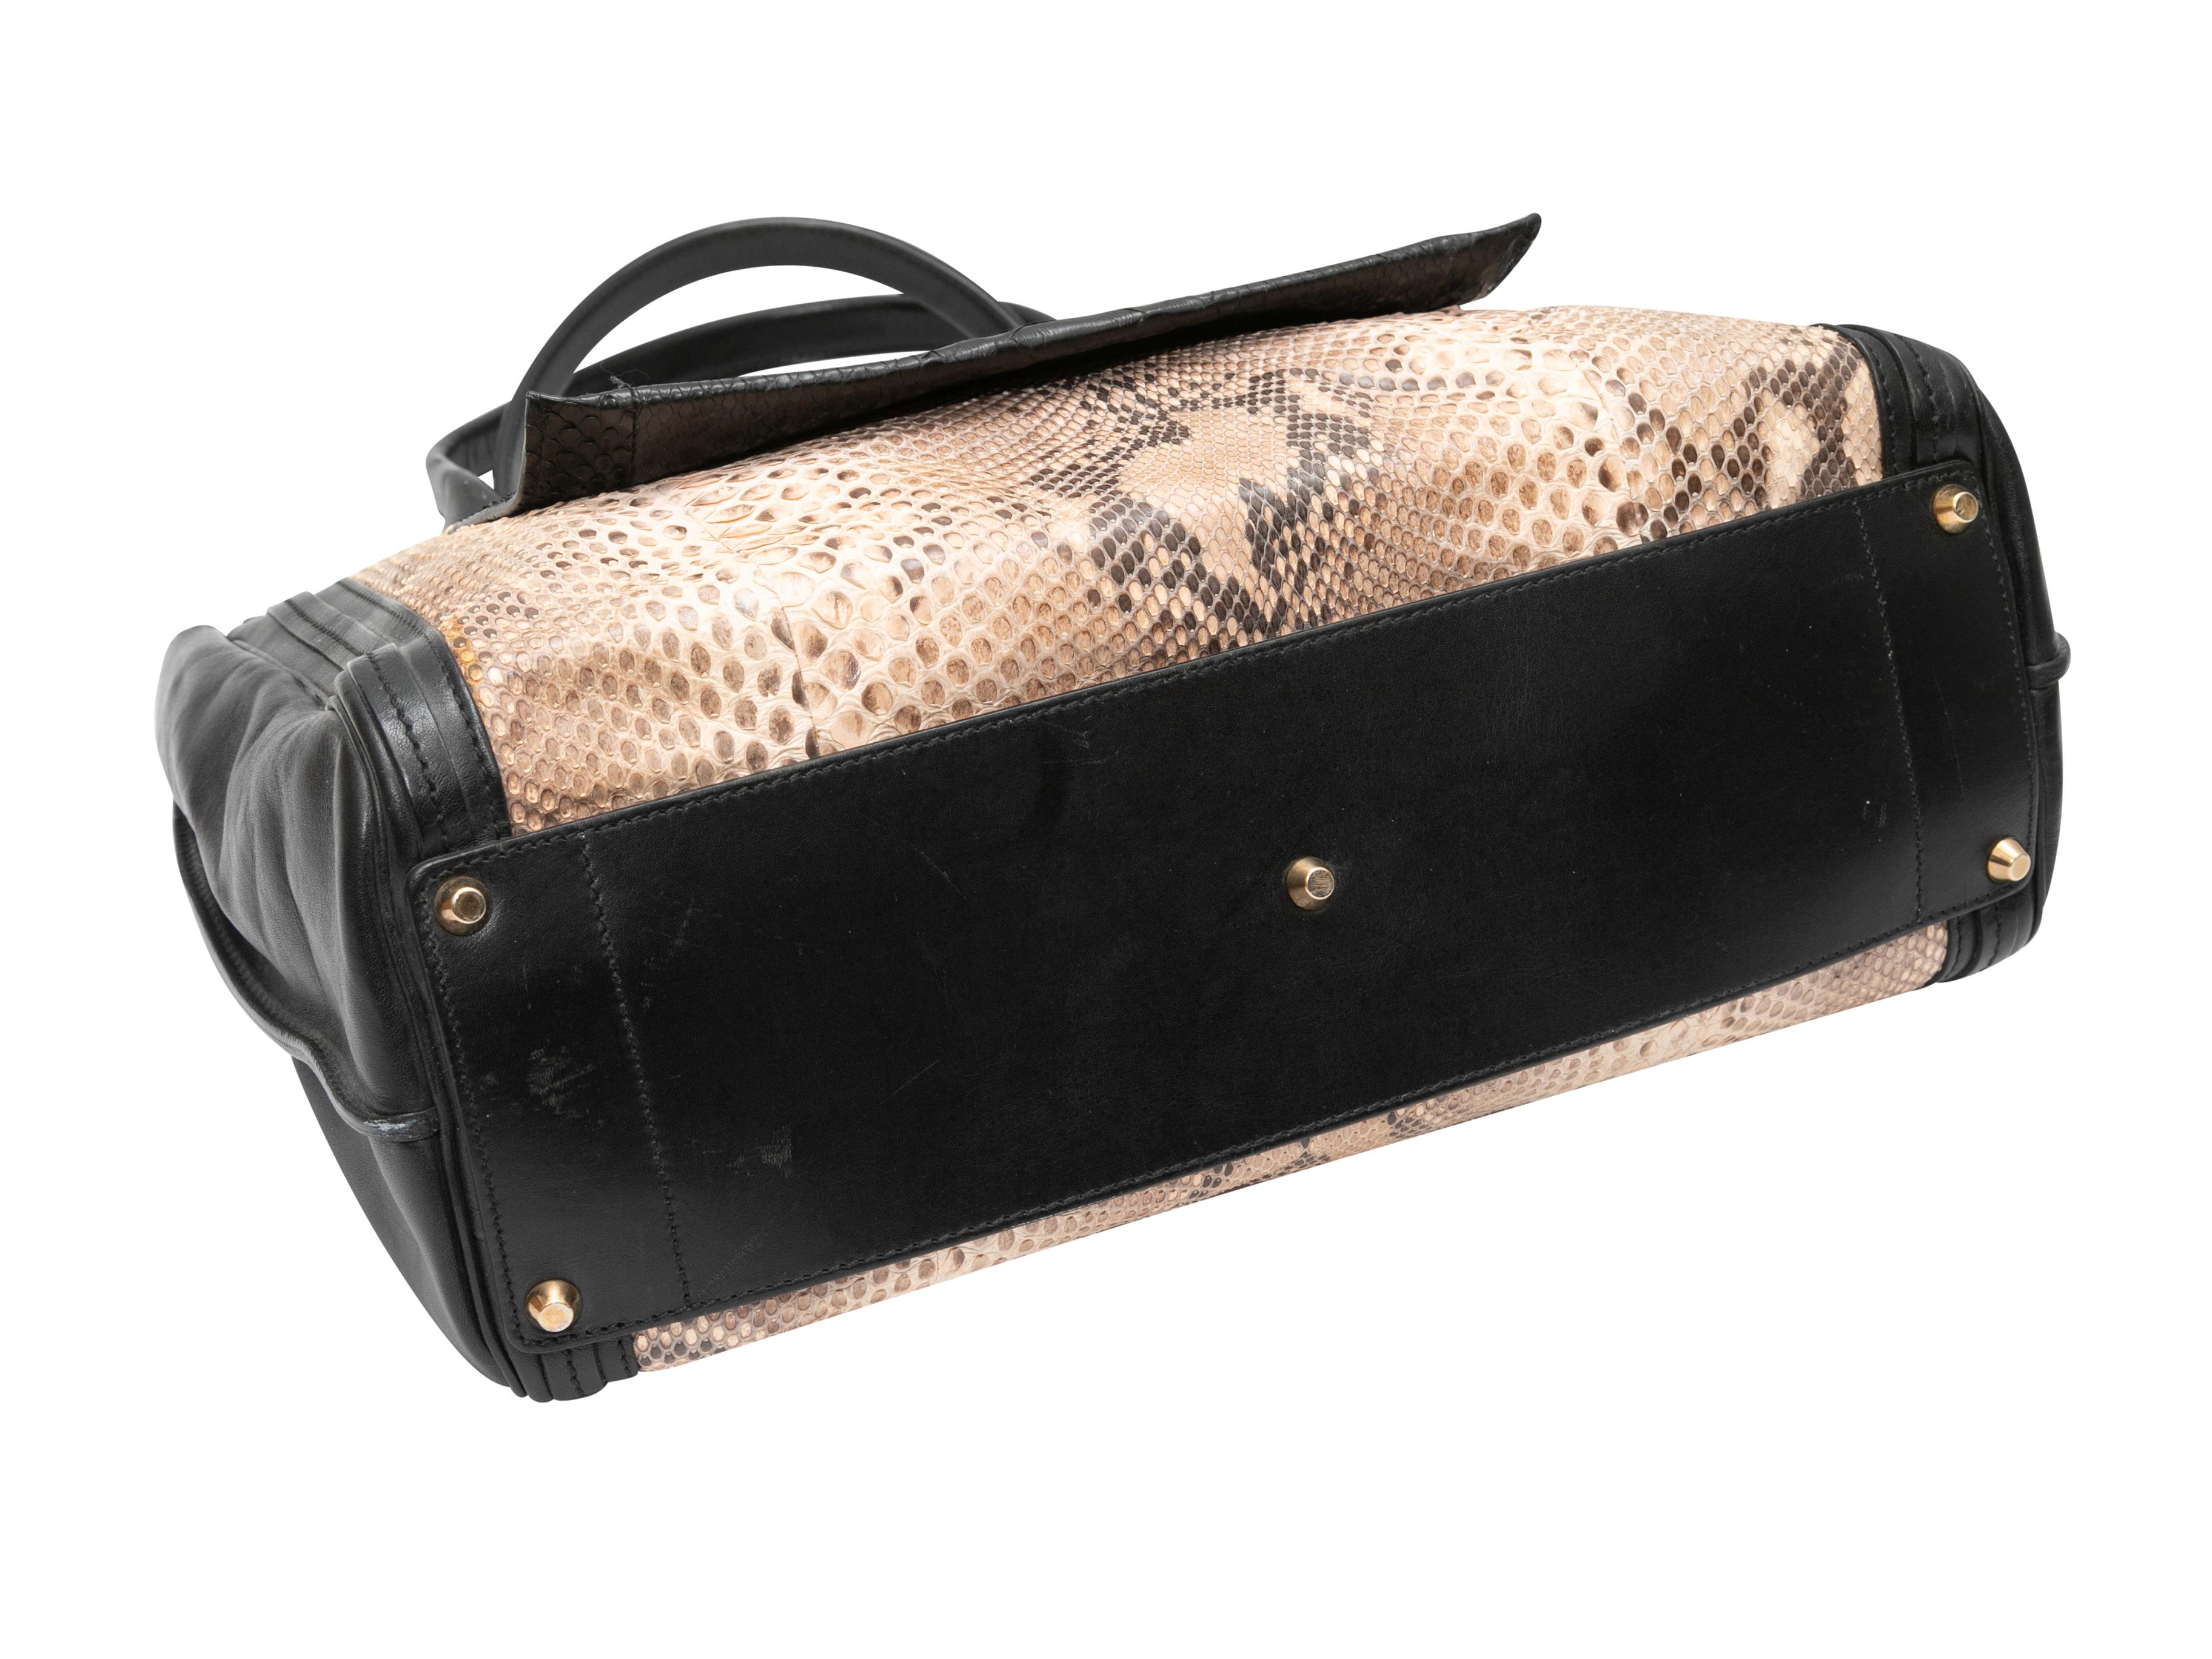 Black & Beige Chloe Leather & Python Tote Bag. This tote bag features a leather and python skin body, gold-tone hardware, dual rolled top handles, an exterior front pocket, and an optional single flat shoulder strap. 17